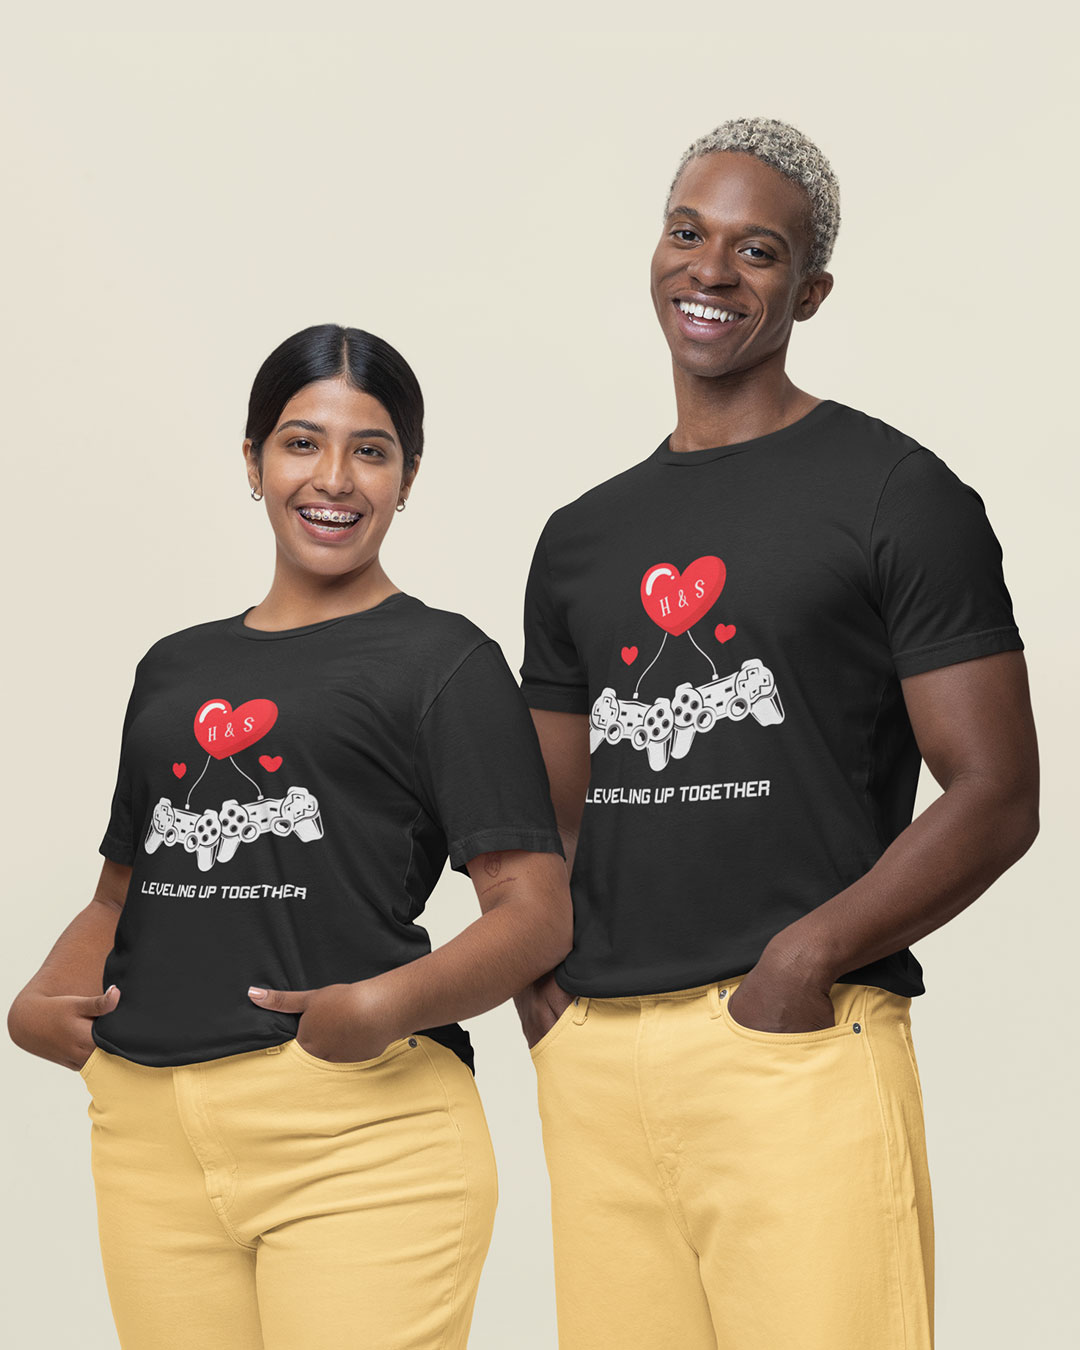 Leveling Up Together Couple T-shirts For Valentine's Day